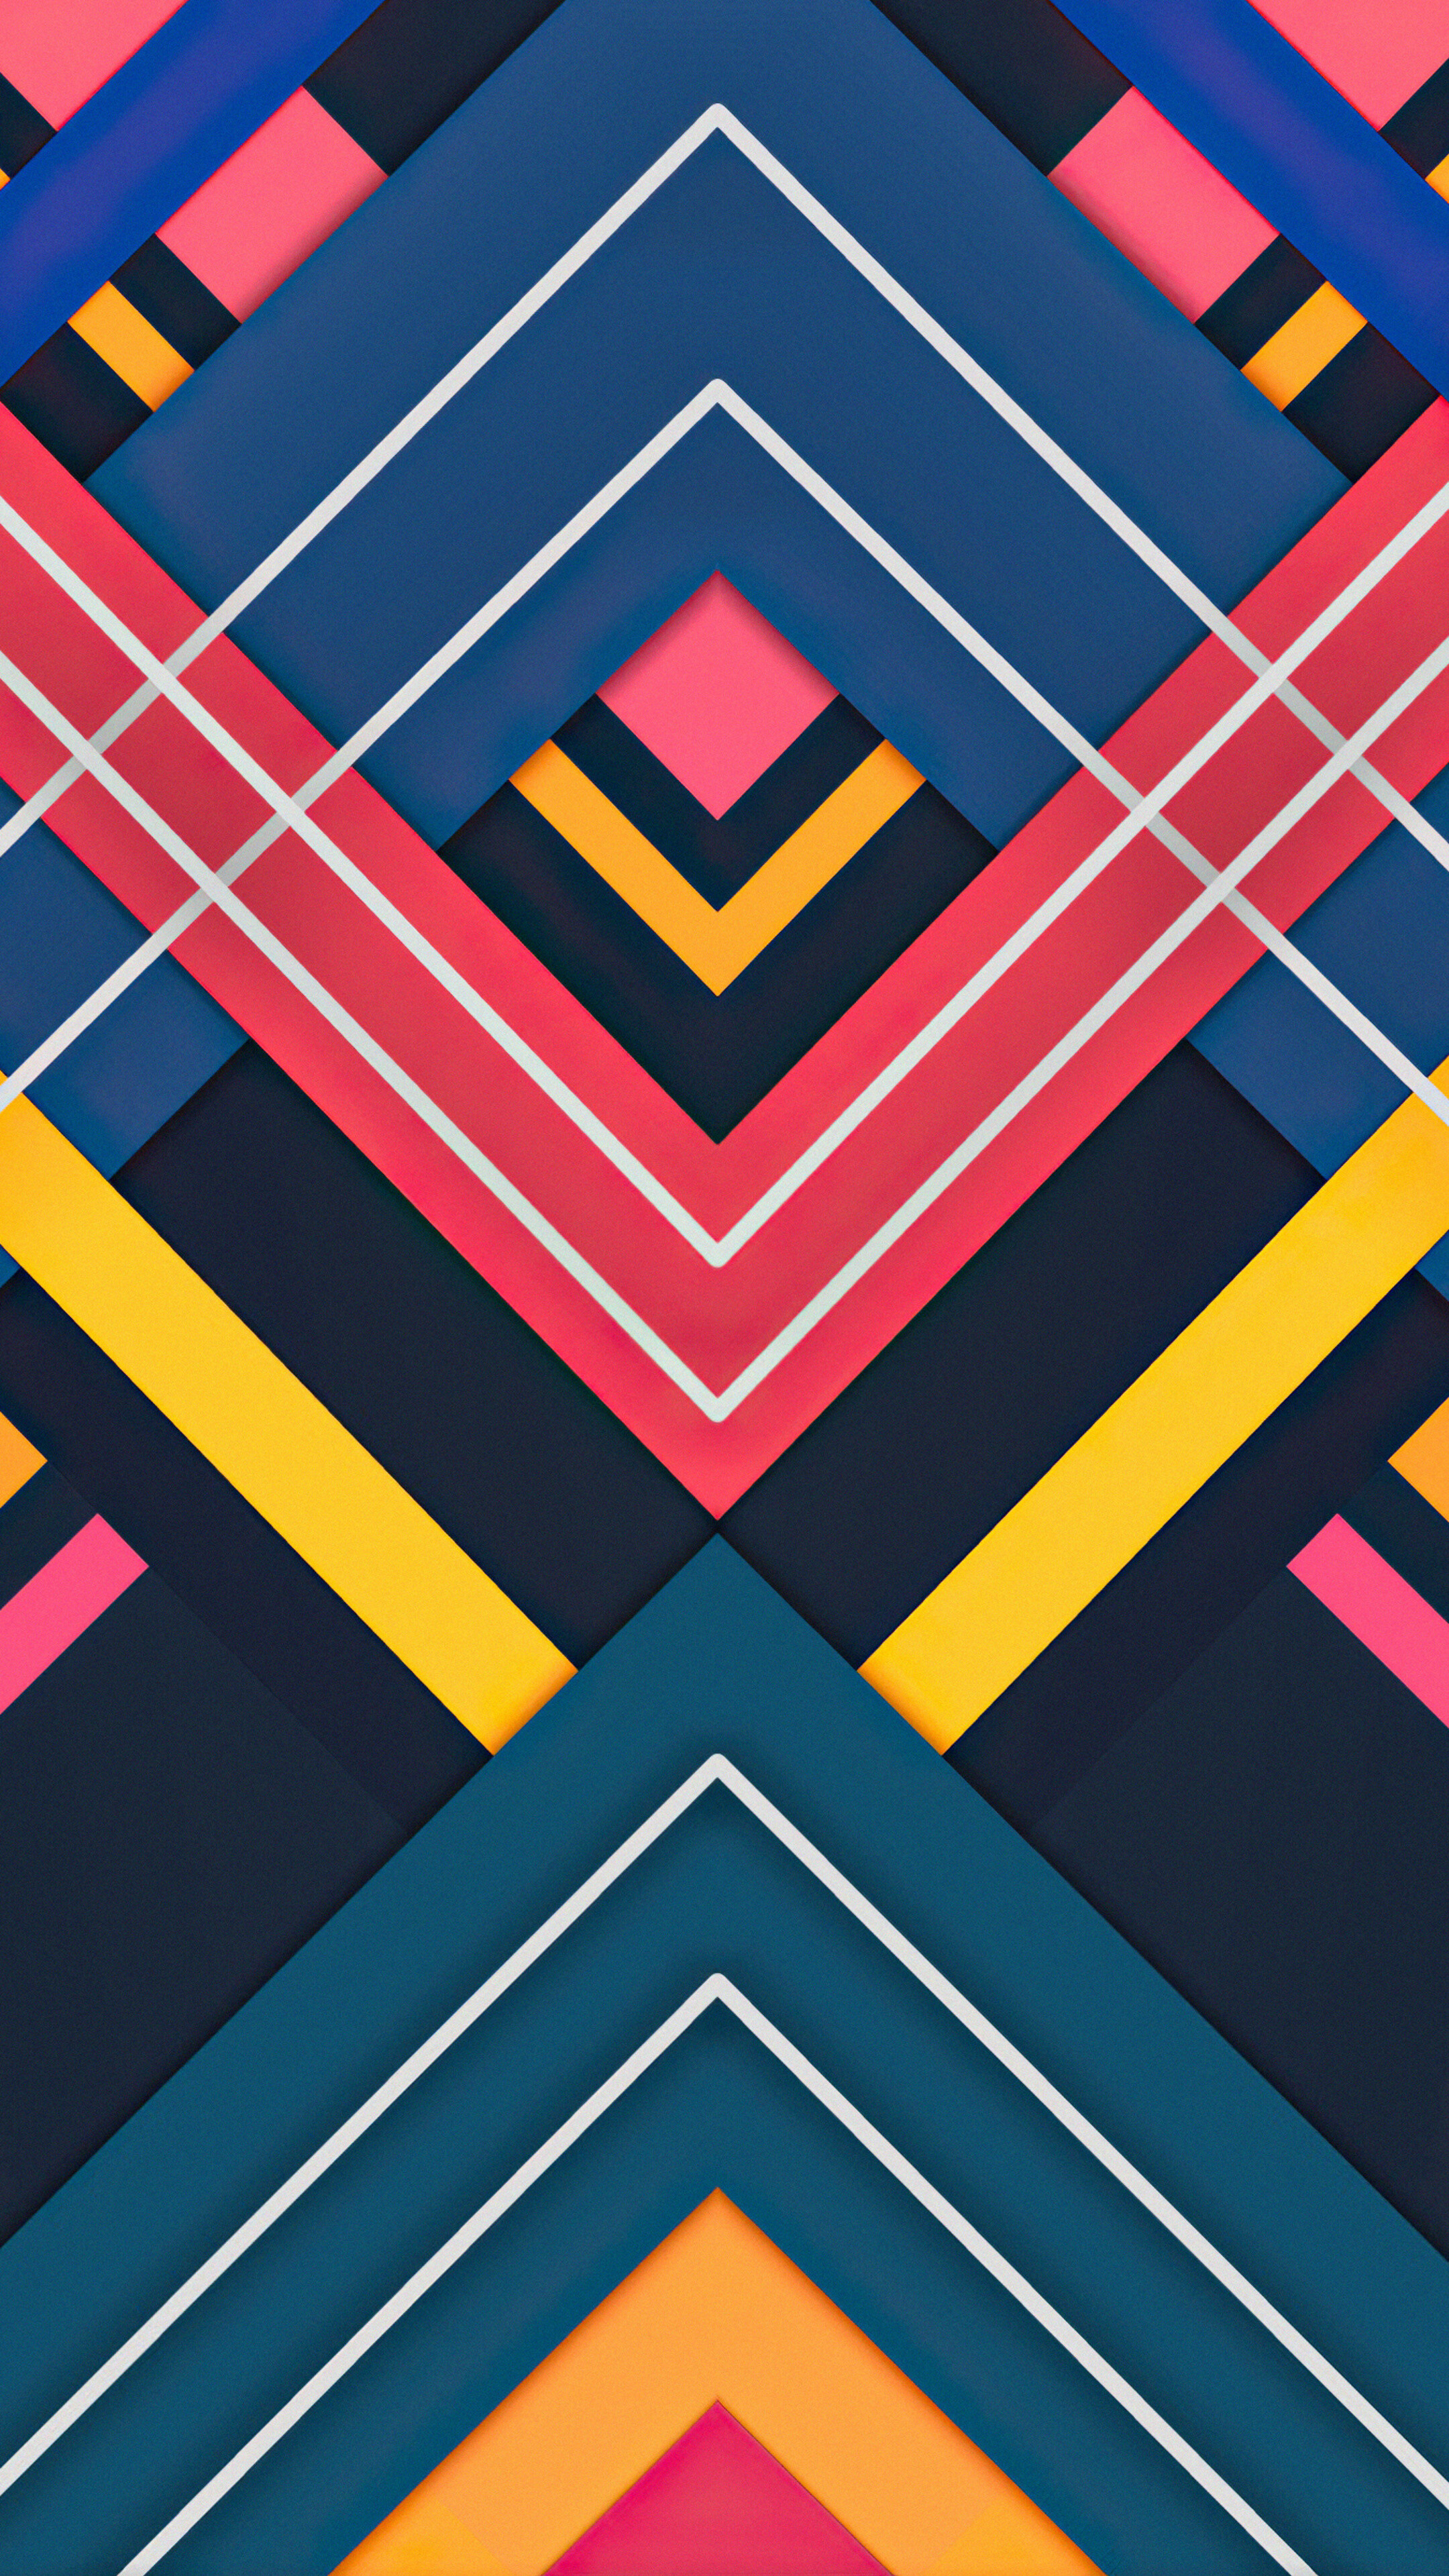 Geometric Abstract: Parallel line segments, Right angles, Squares. 2160x3840 4K Background.